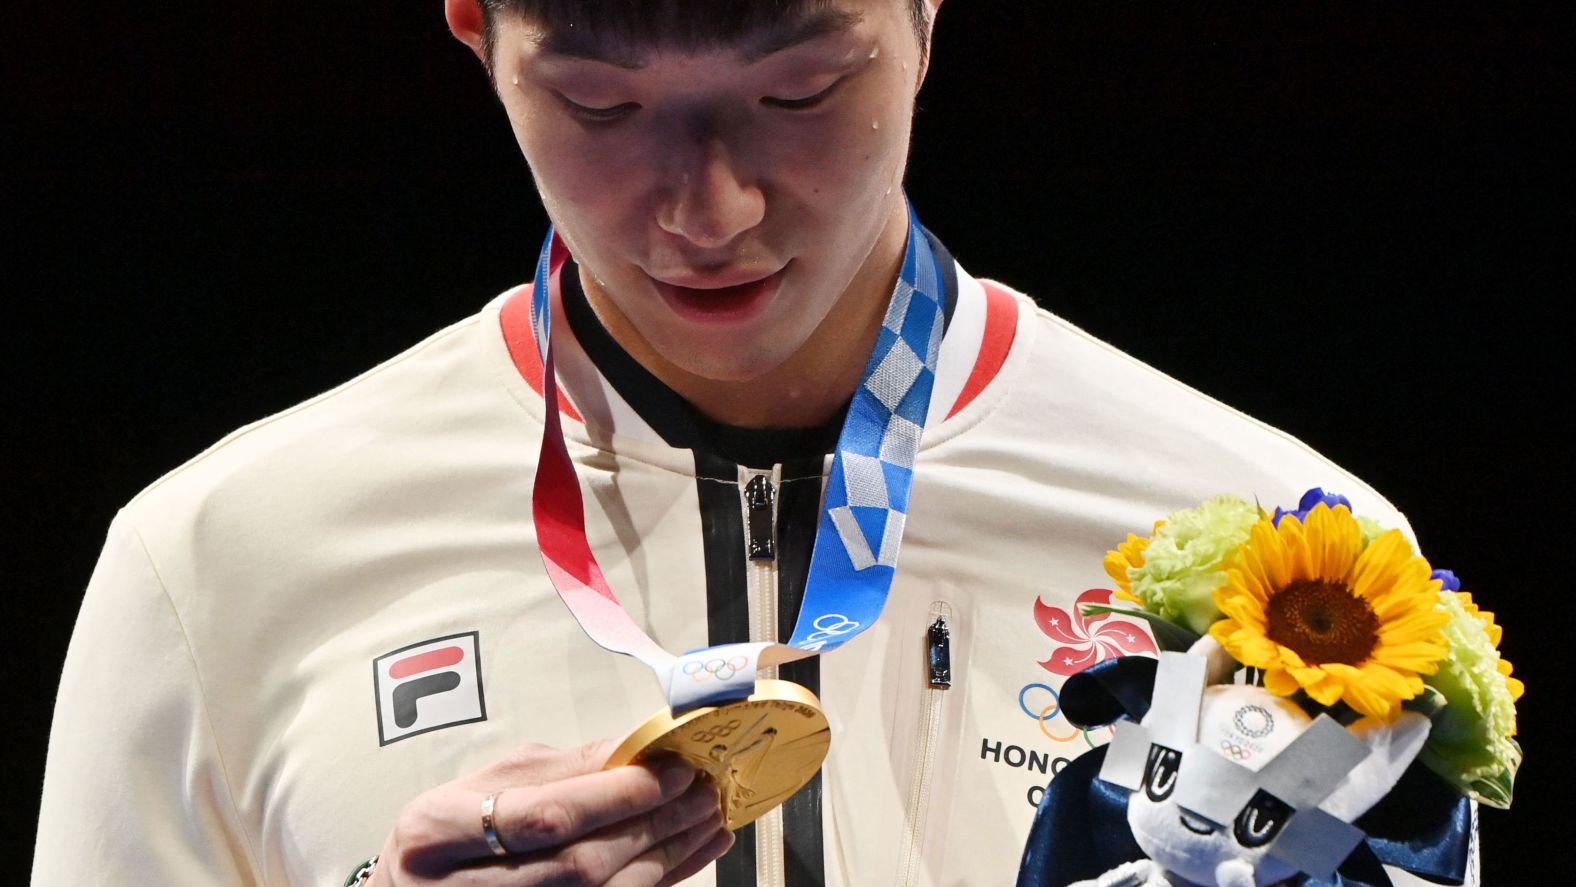 Hong Kong fencer Edgar Cheung looks at his gold medal after beating Italy's Daniele Garozzo in the men's foil final on July 26. It was <a href="https://www.cnn.com/world/live-news/tokyo-2020-olympics-07-26-21-spt/h_49e87856e0c333e6f009a513d4e01e57" target="_blank">Hong Kong's first gold</a> at the Summer Olympics in 25 years.